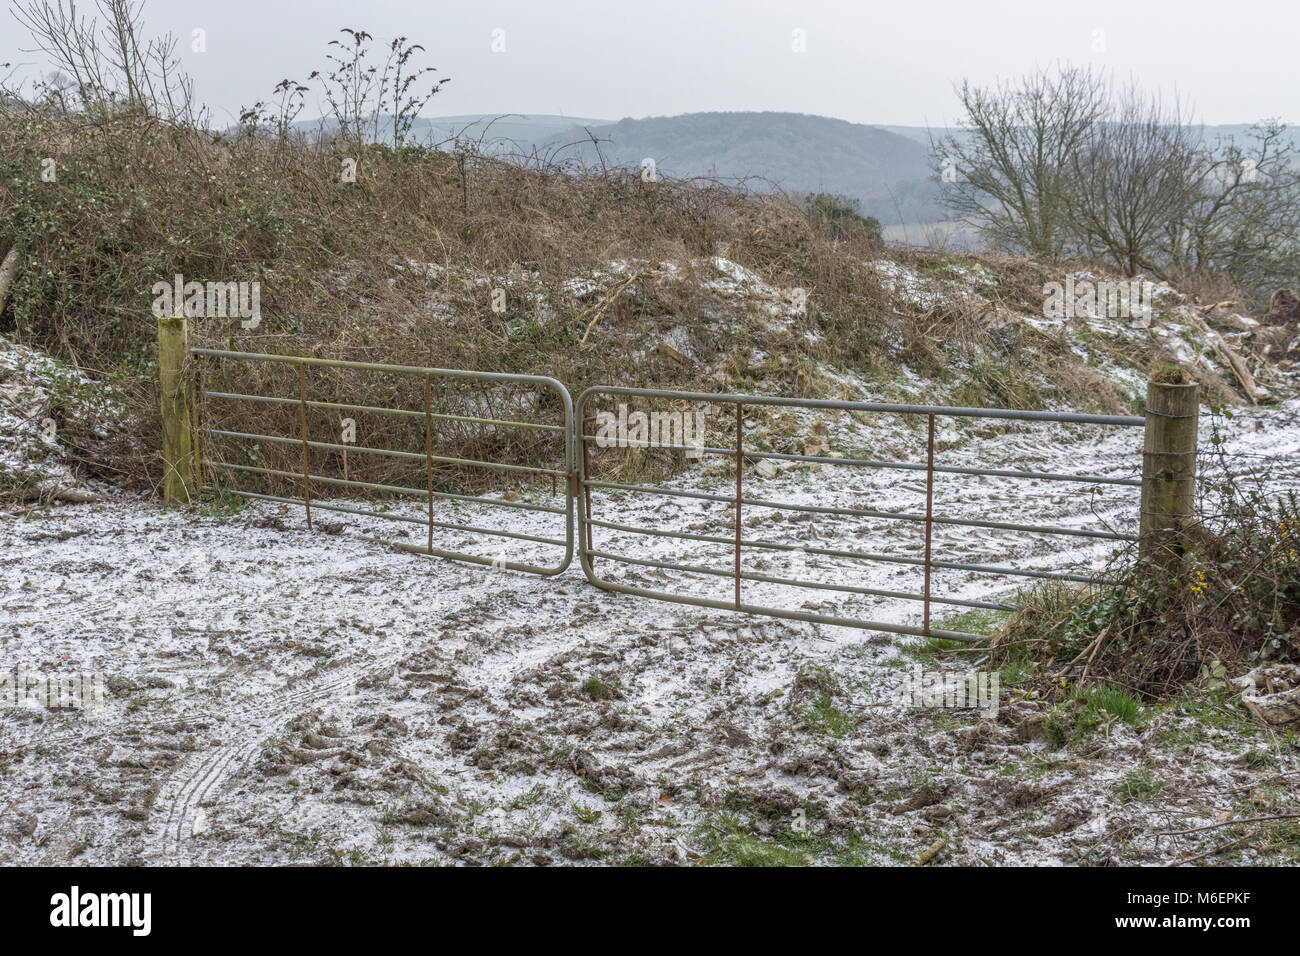 Metal farm gate during the snowy conditions of the 2018 'Beast from the East'. Closed gate to field. Stock Photo